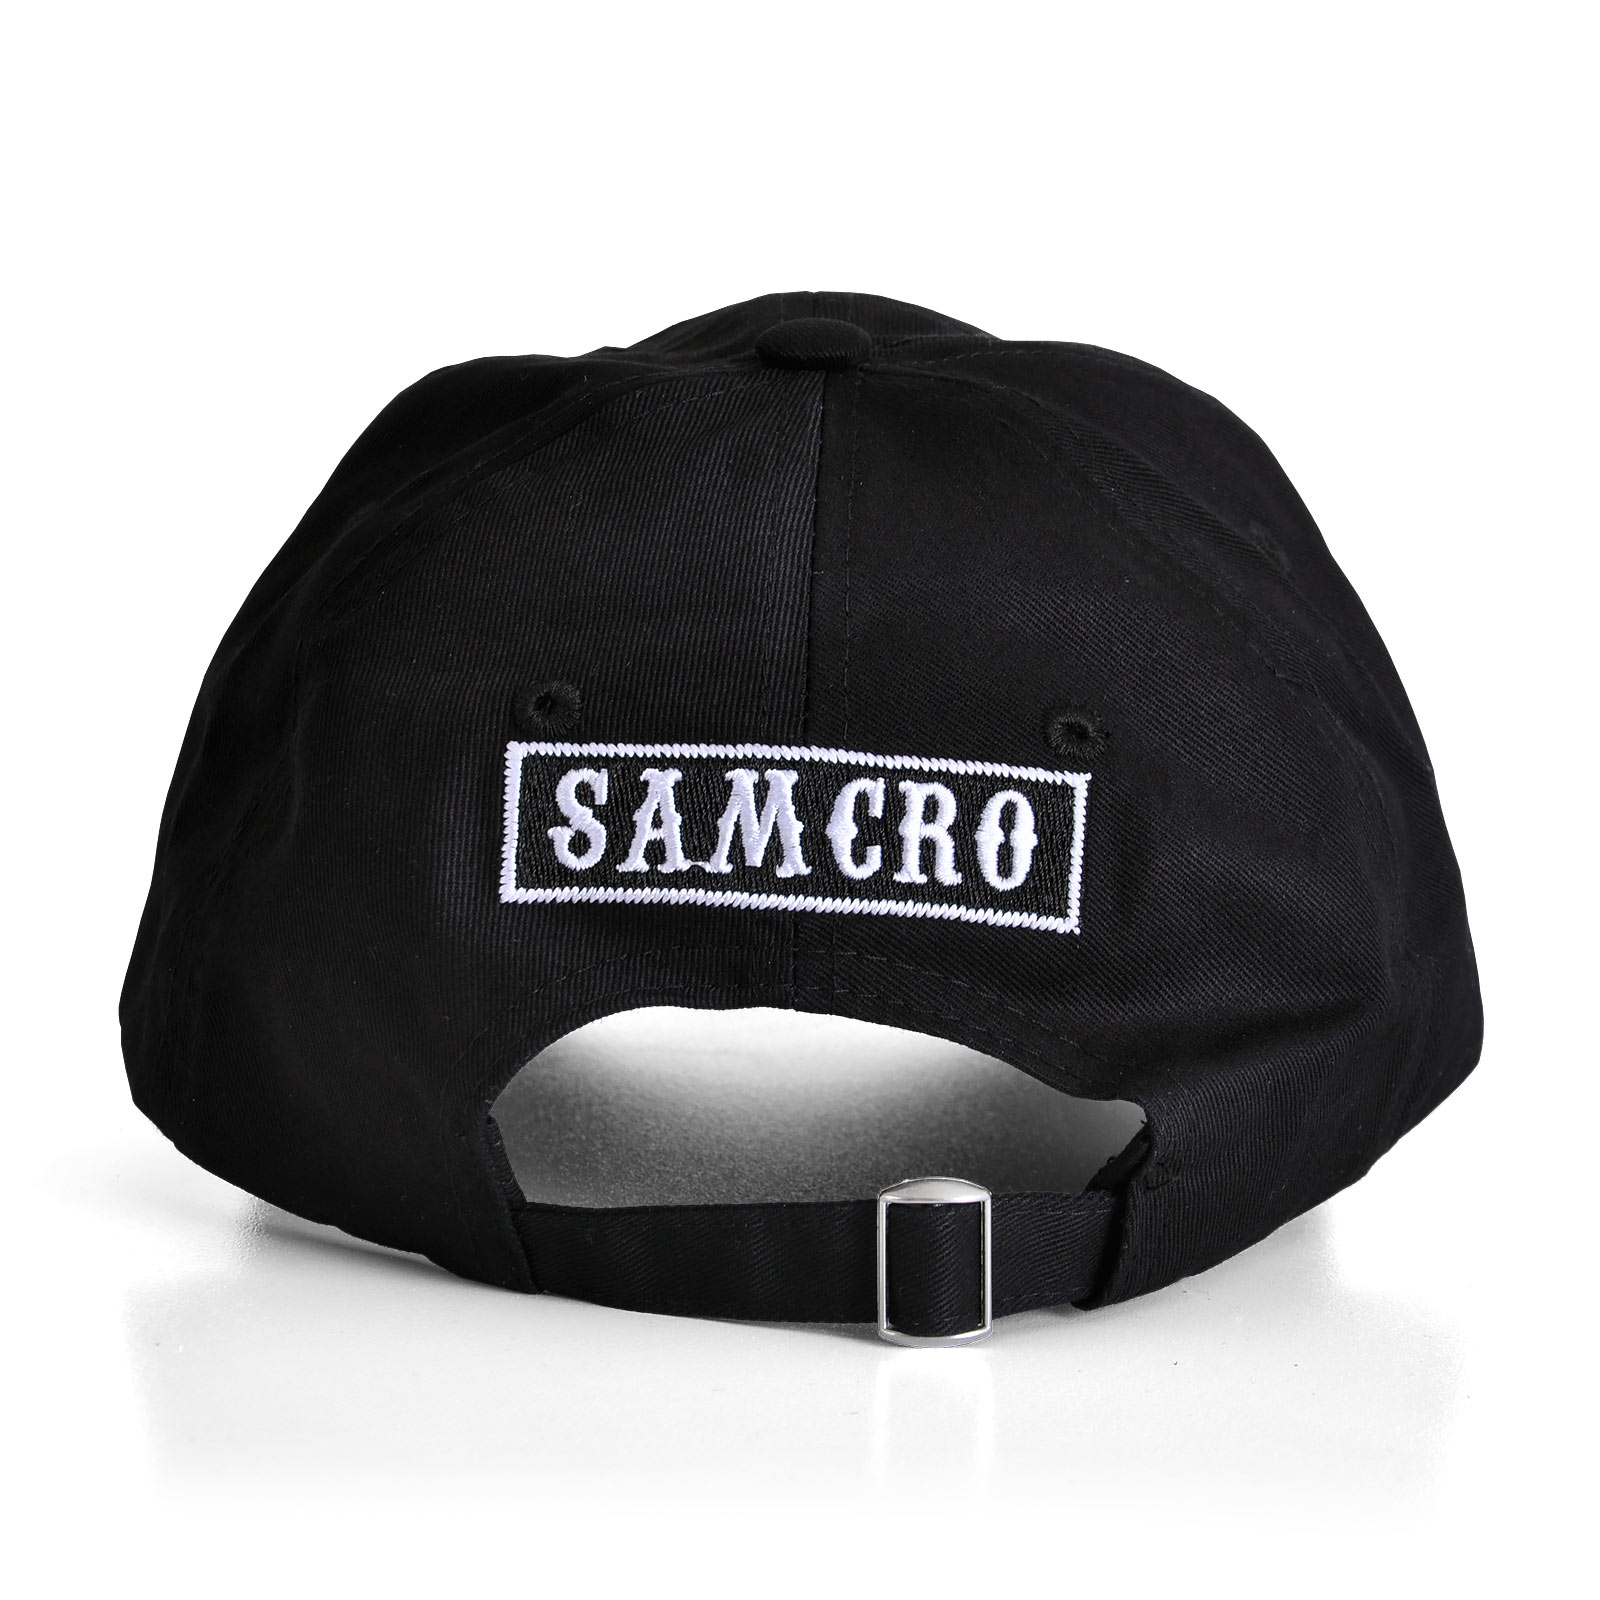 Sons Of Anarchy - Casquette Logo Reaper